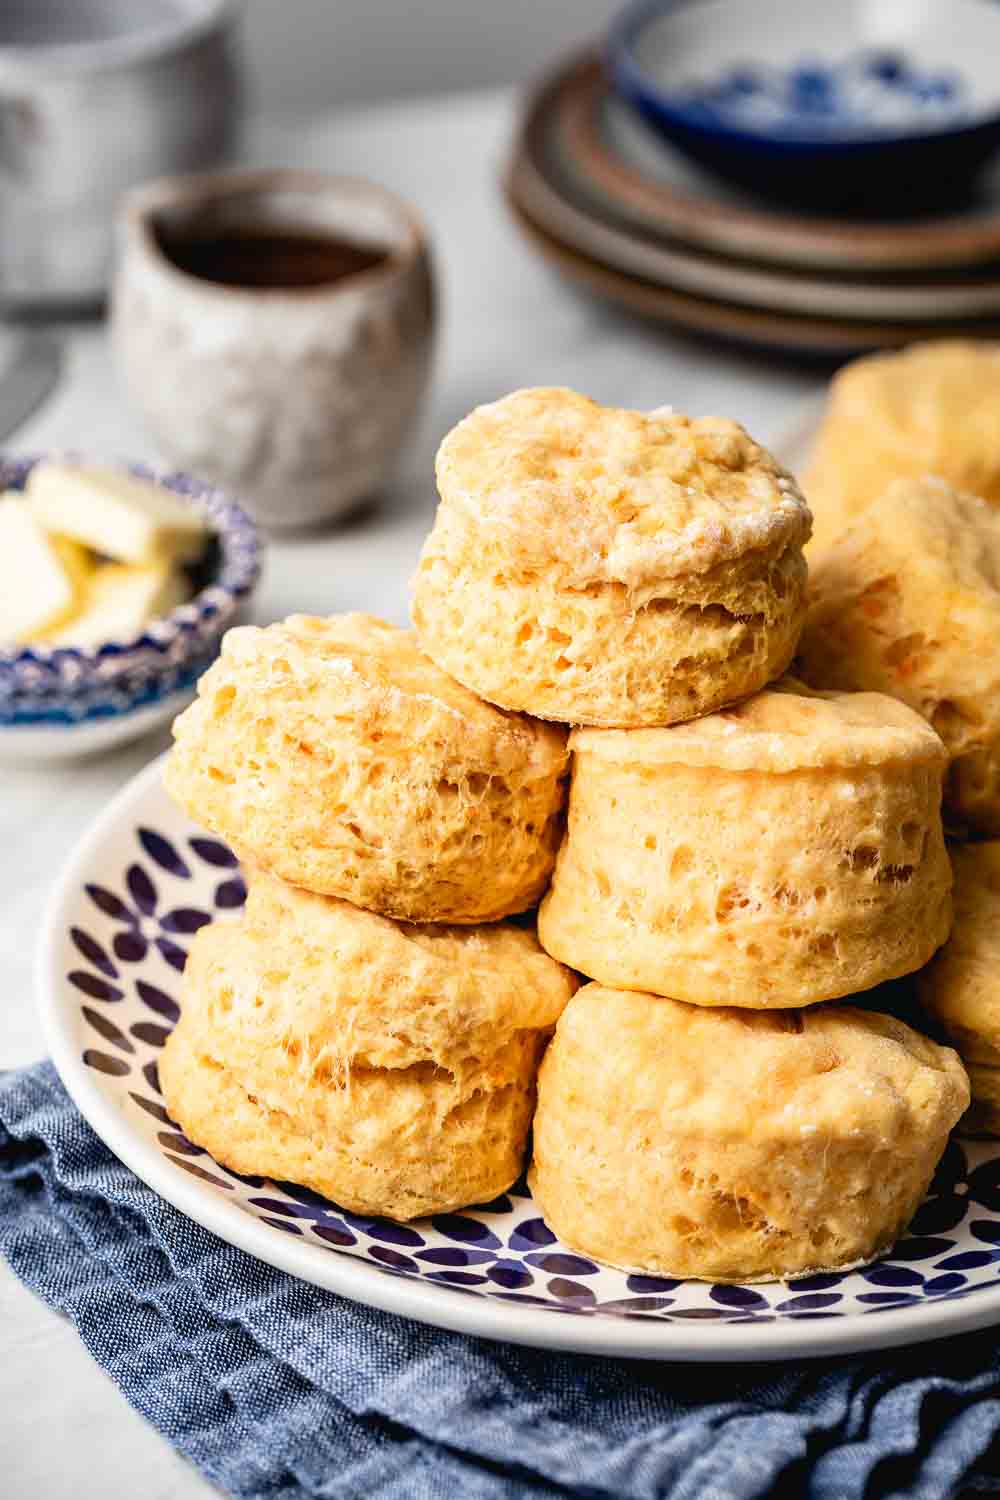 healthy and homemade sweet potato biscuits are plated and photographed from the front view.